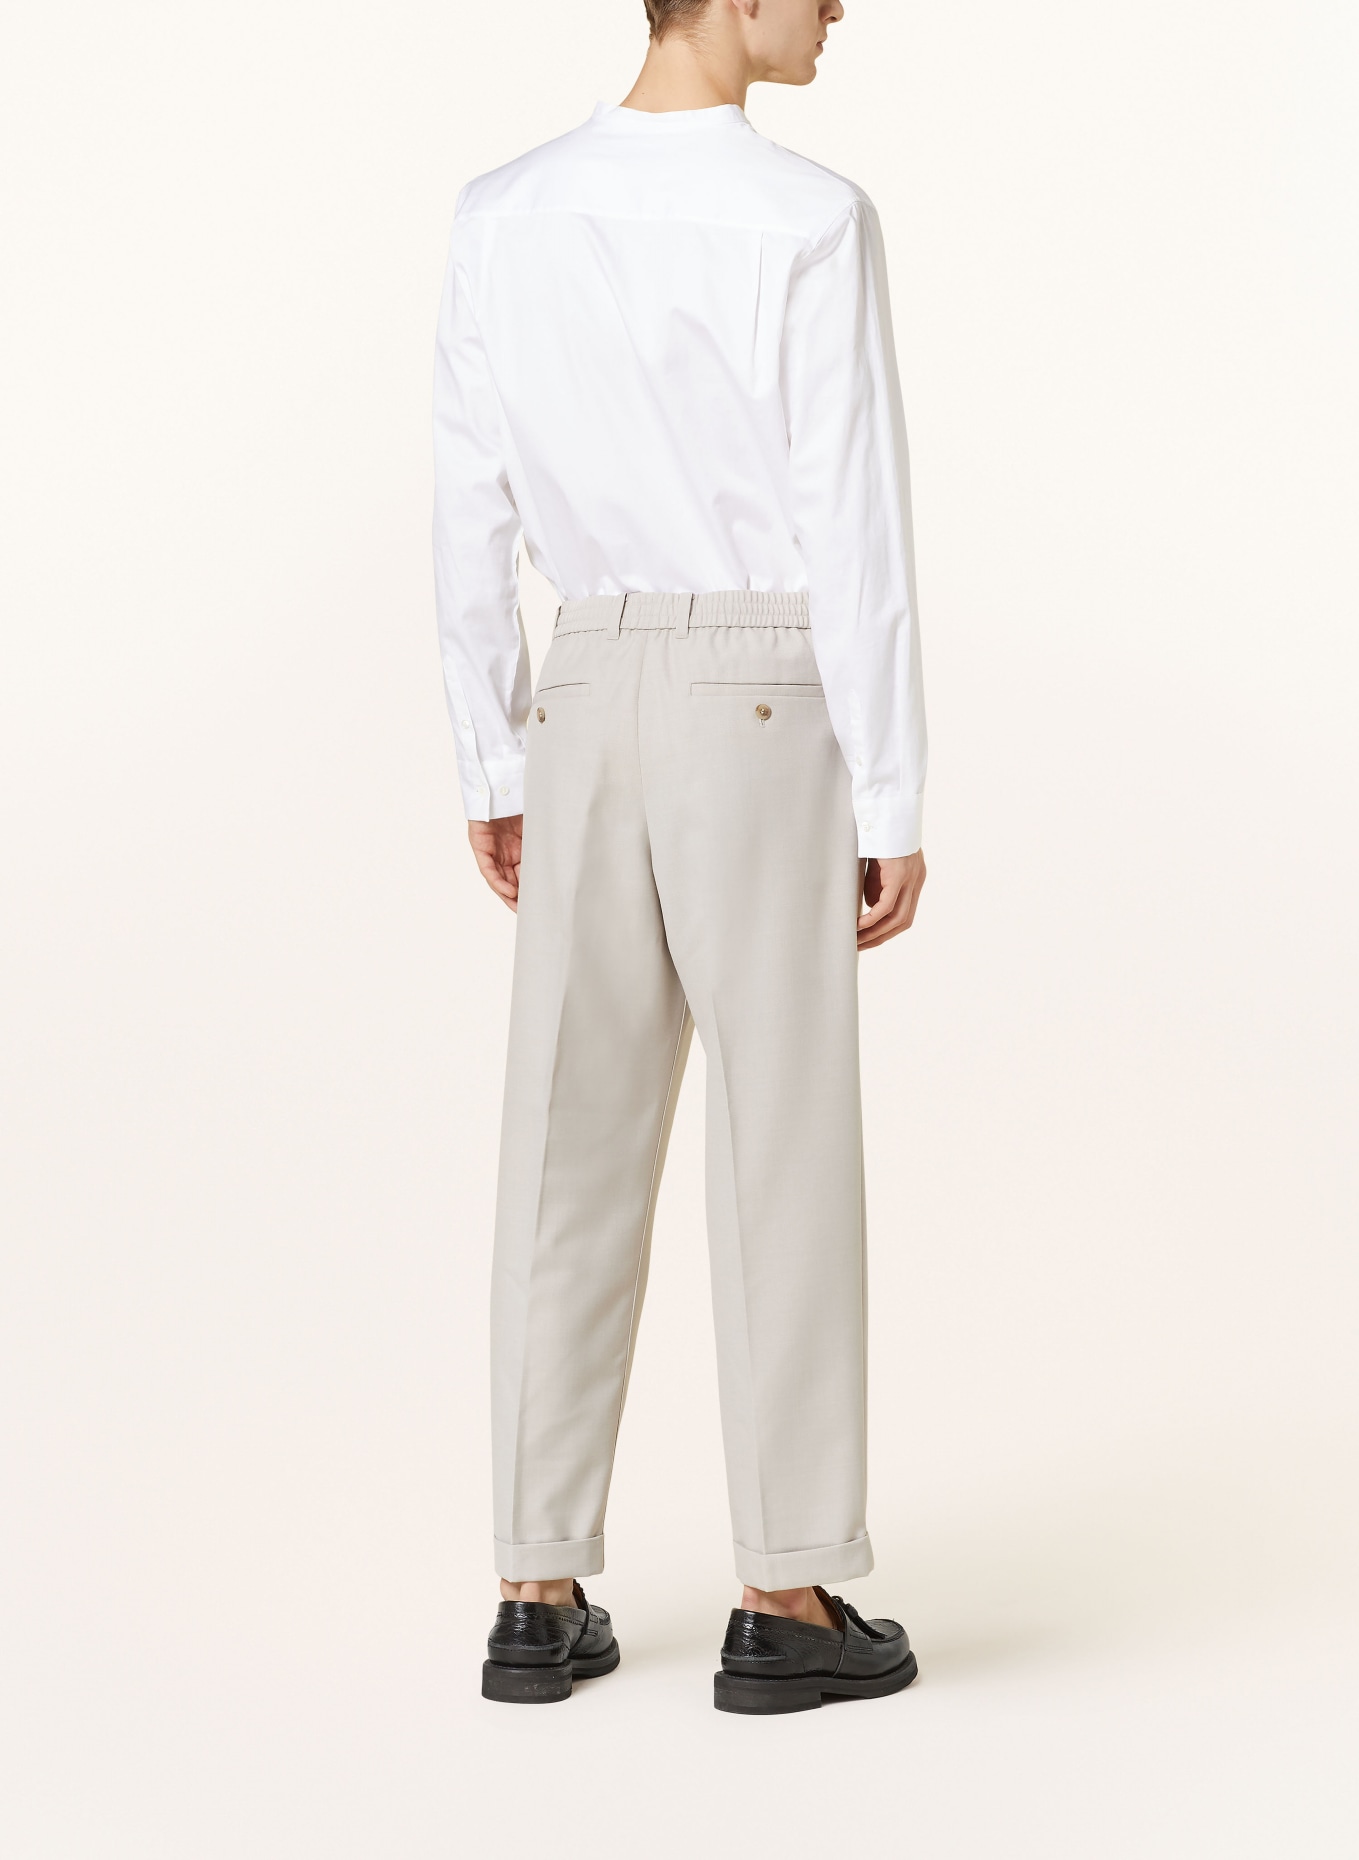 COS Trousers in jogger style relaxed straight fit, Color: LIGHT GRAY (Image 3)